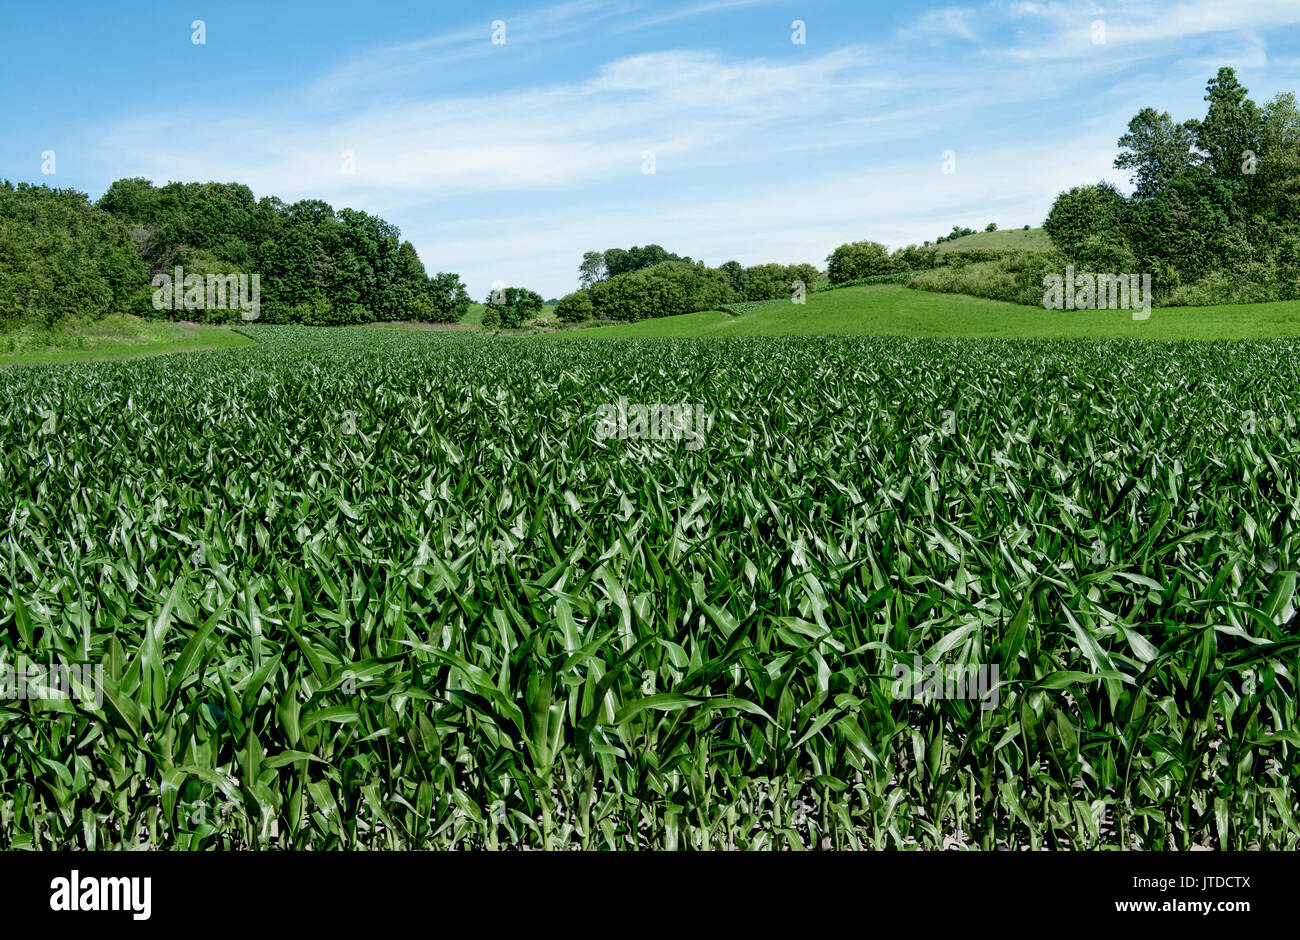 Corn Fields on the Fourth of July:  Corn stalks reach a height of 3-4 feet in early July on a small farm in southern Wisconsin. Stock Photo